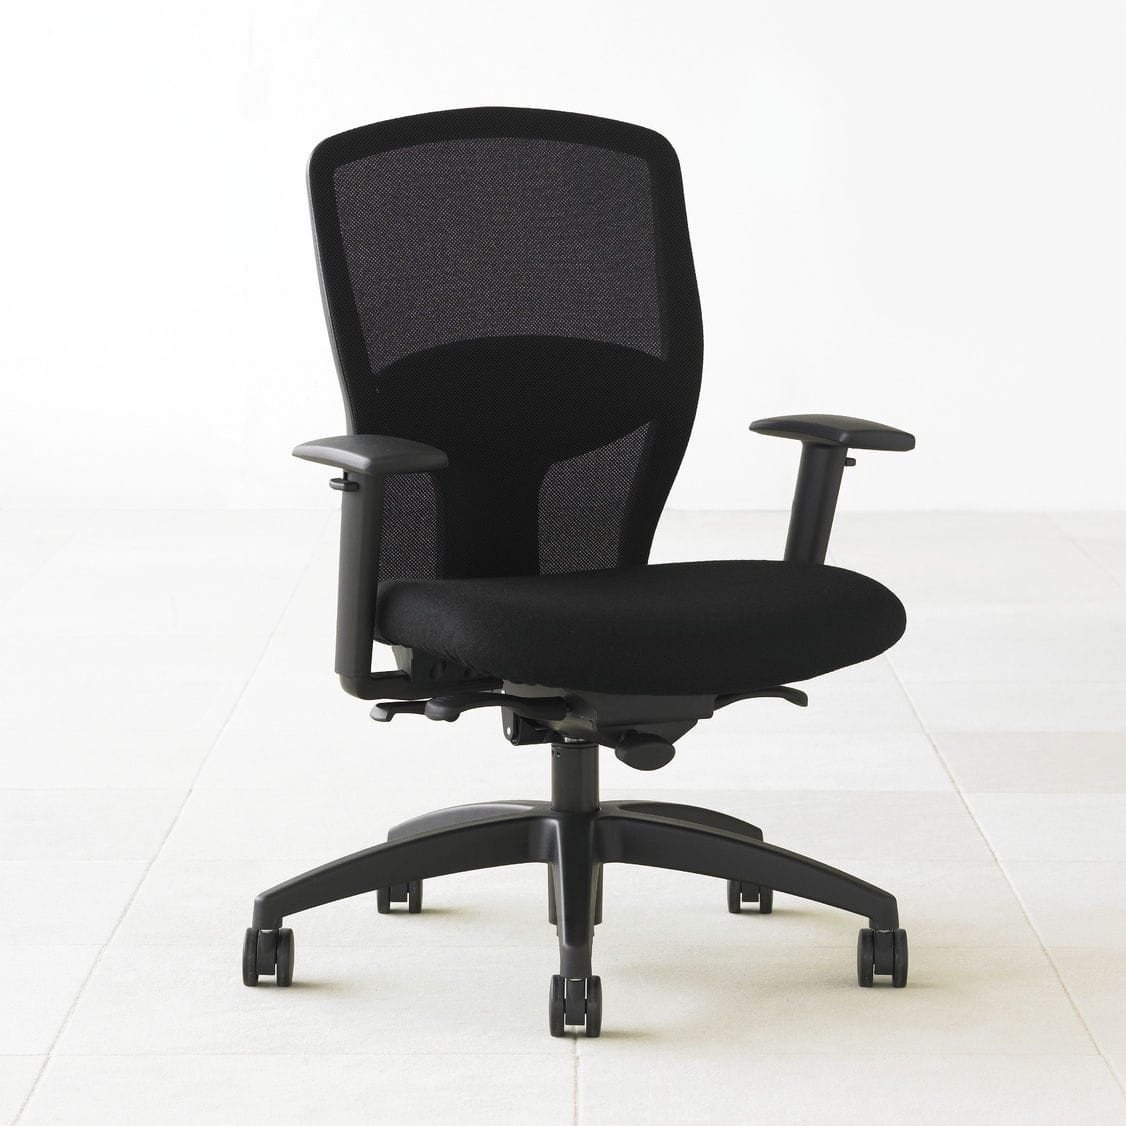 Top 20 Costco Office Chair - Best Collections Ever | Home Decor | DIY